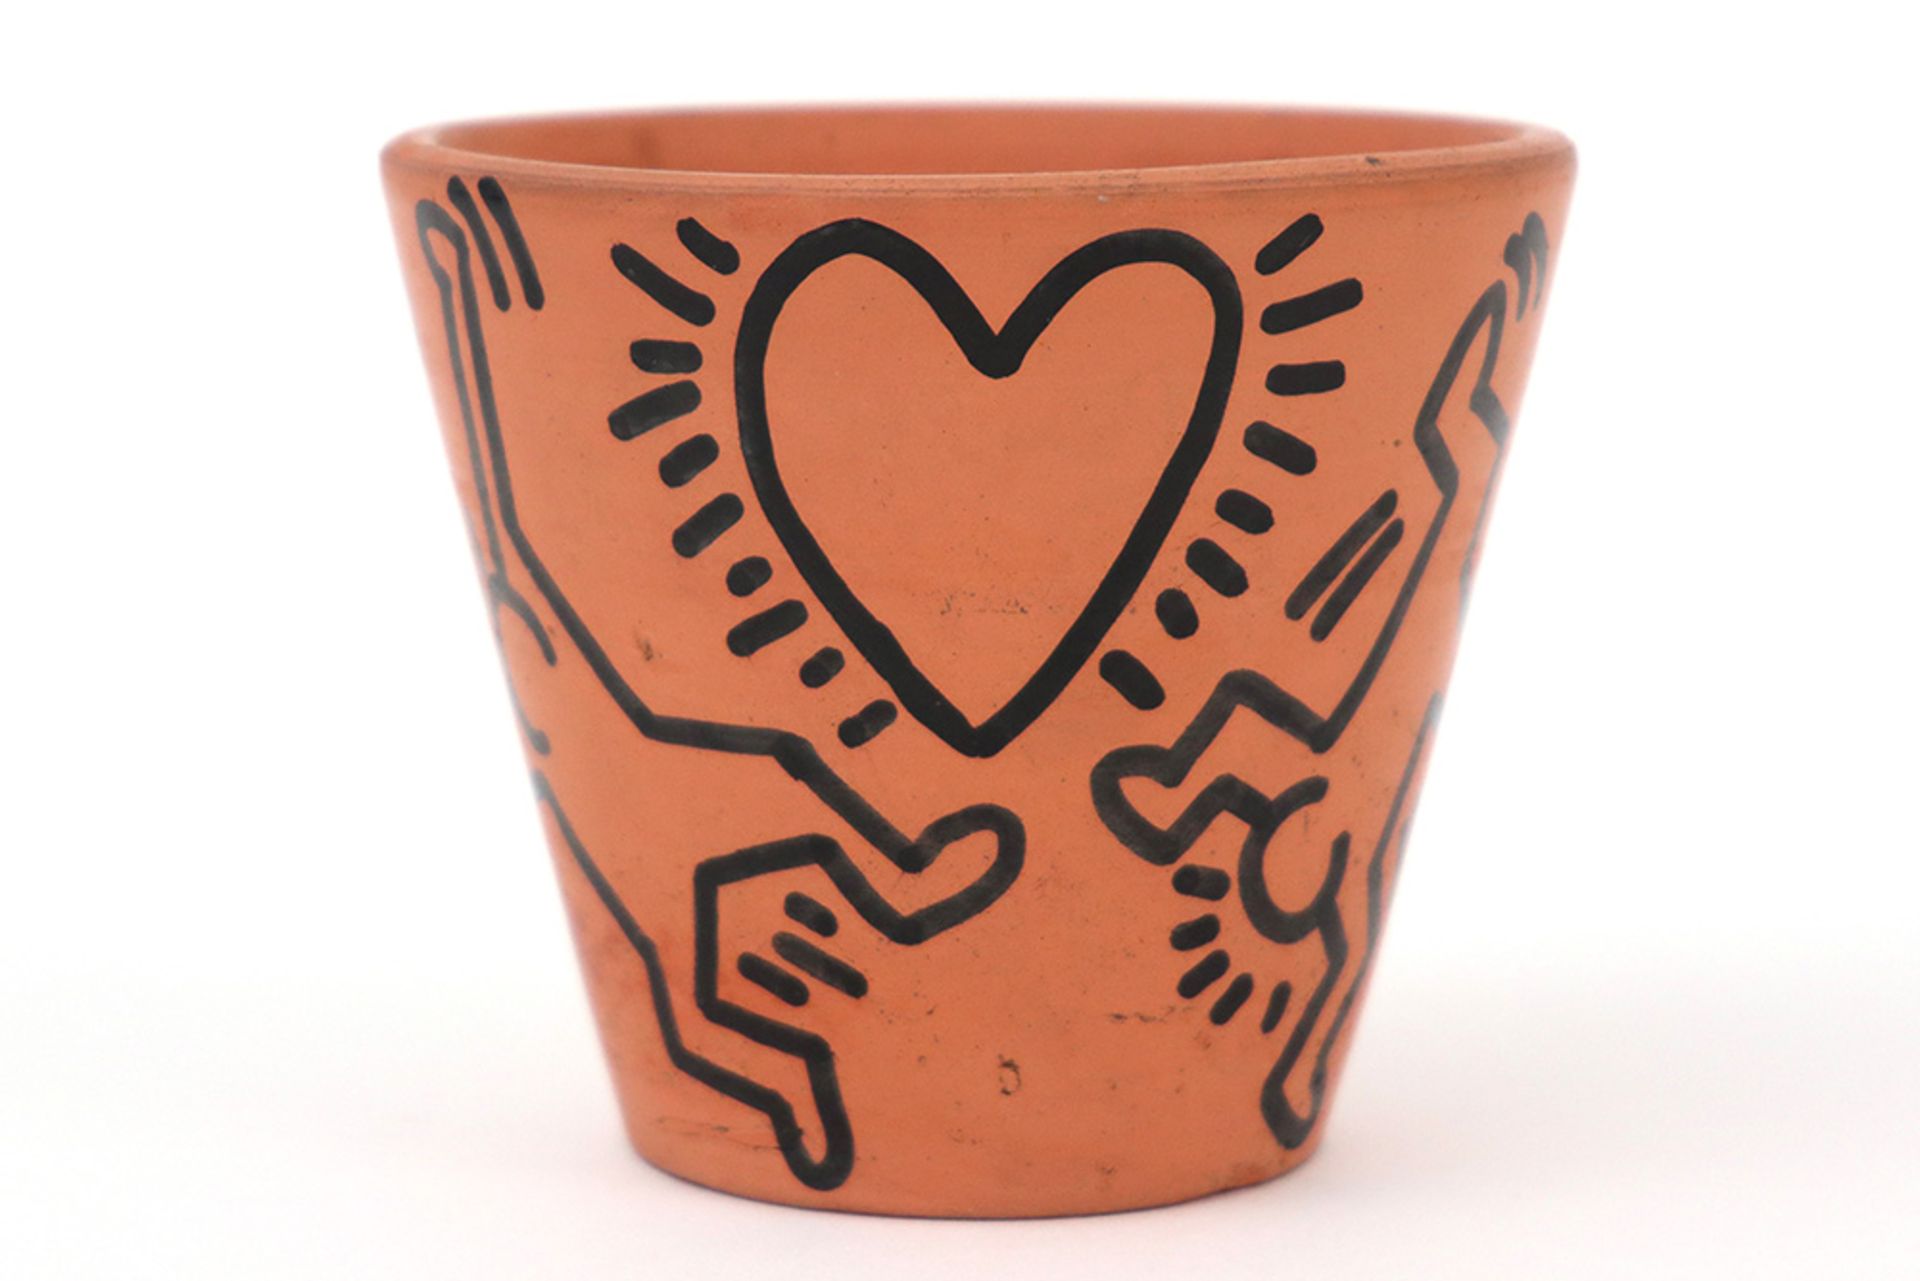 Keith Haring signed drawing in felt-tip pen on ceramic flower pot - dated (19)89 || HARING KEITH ( - Image 4 of 7